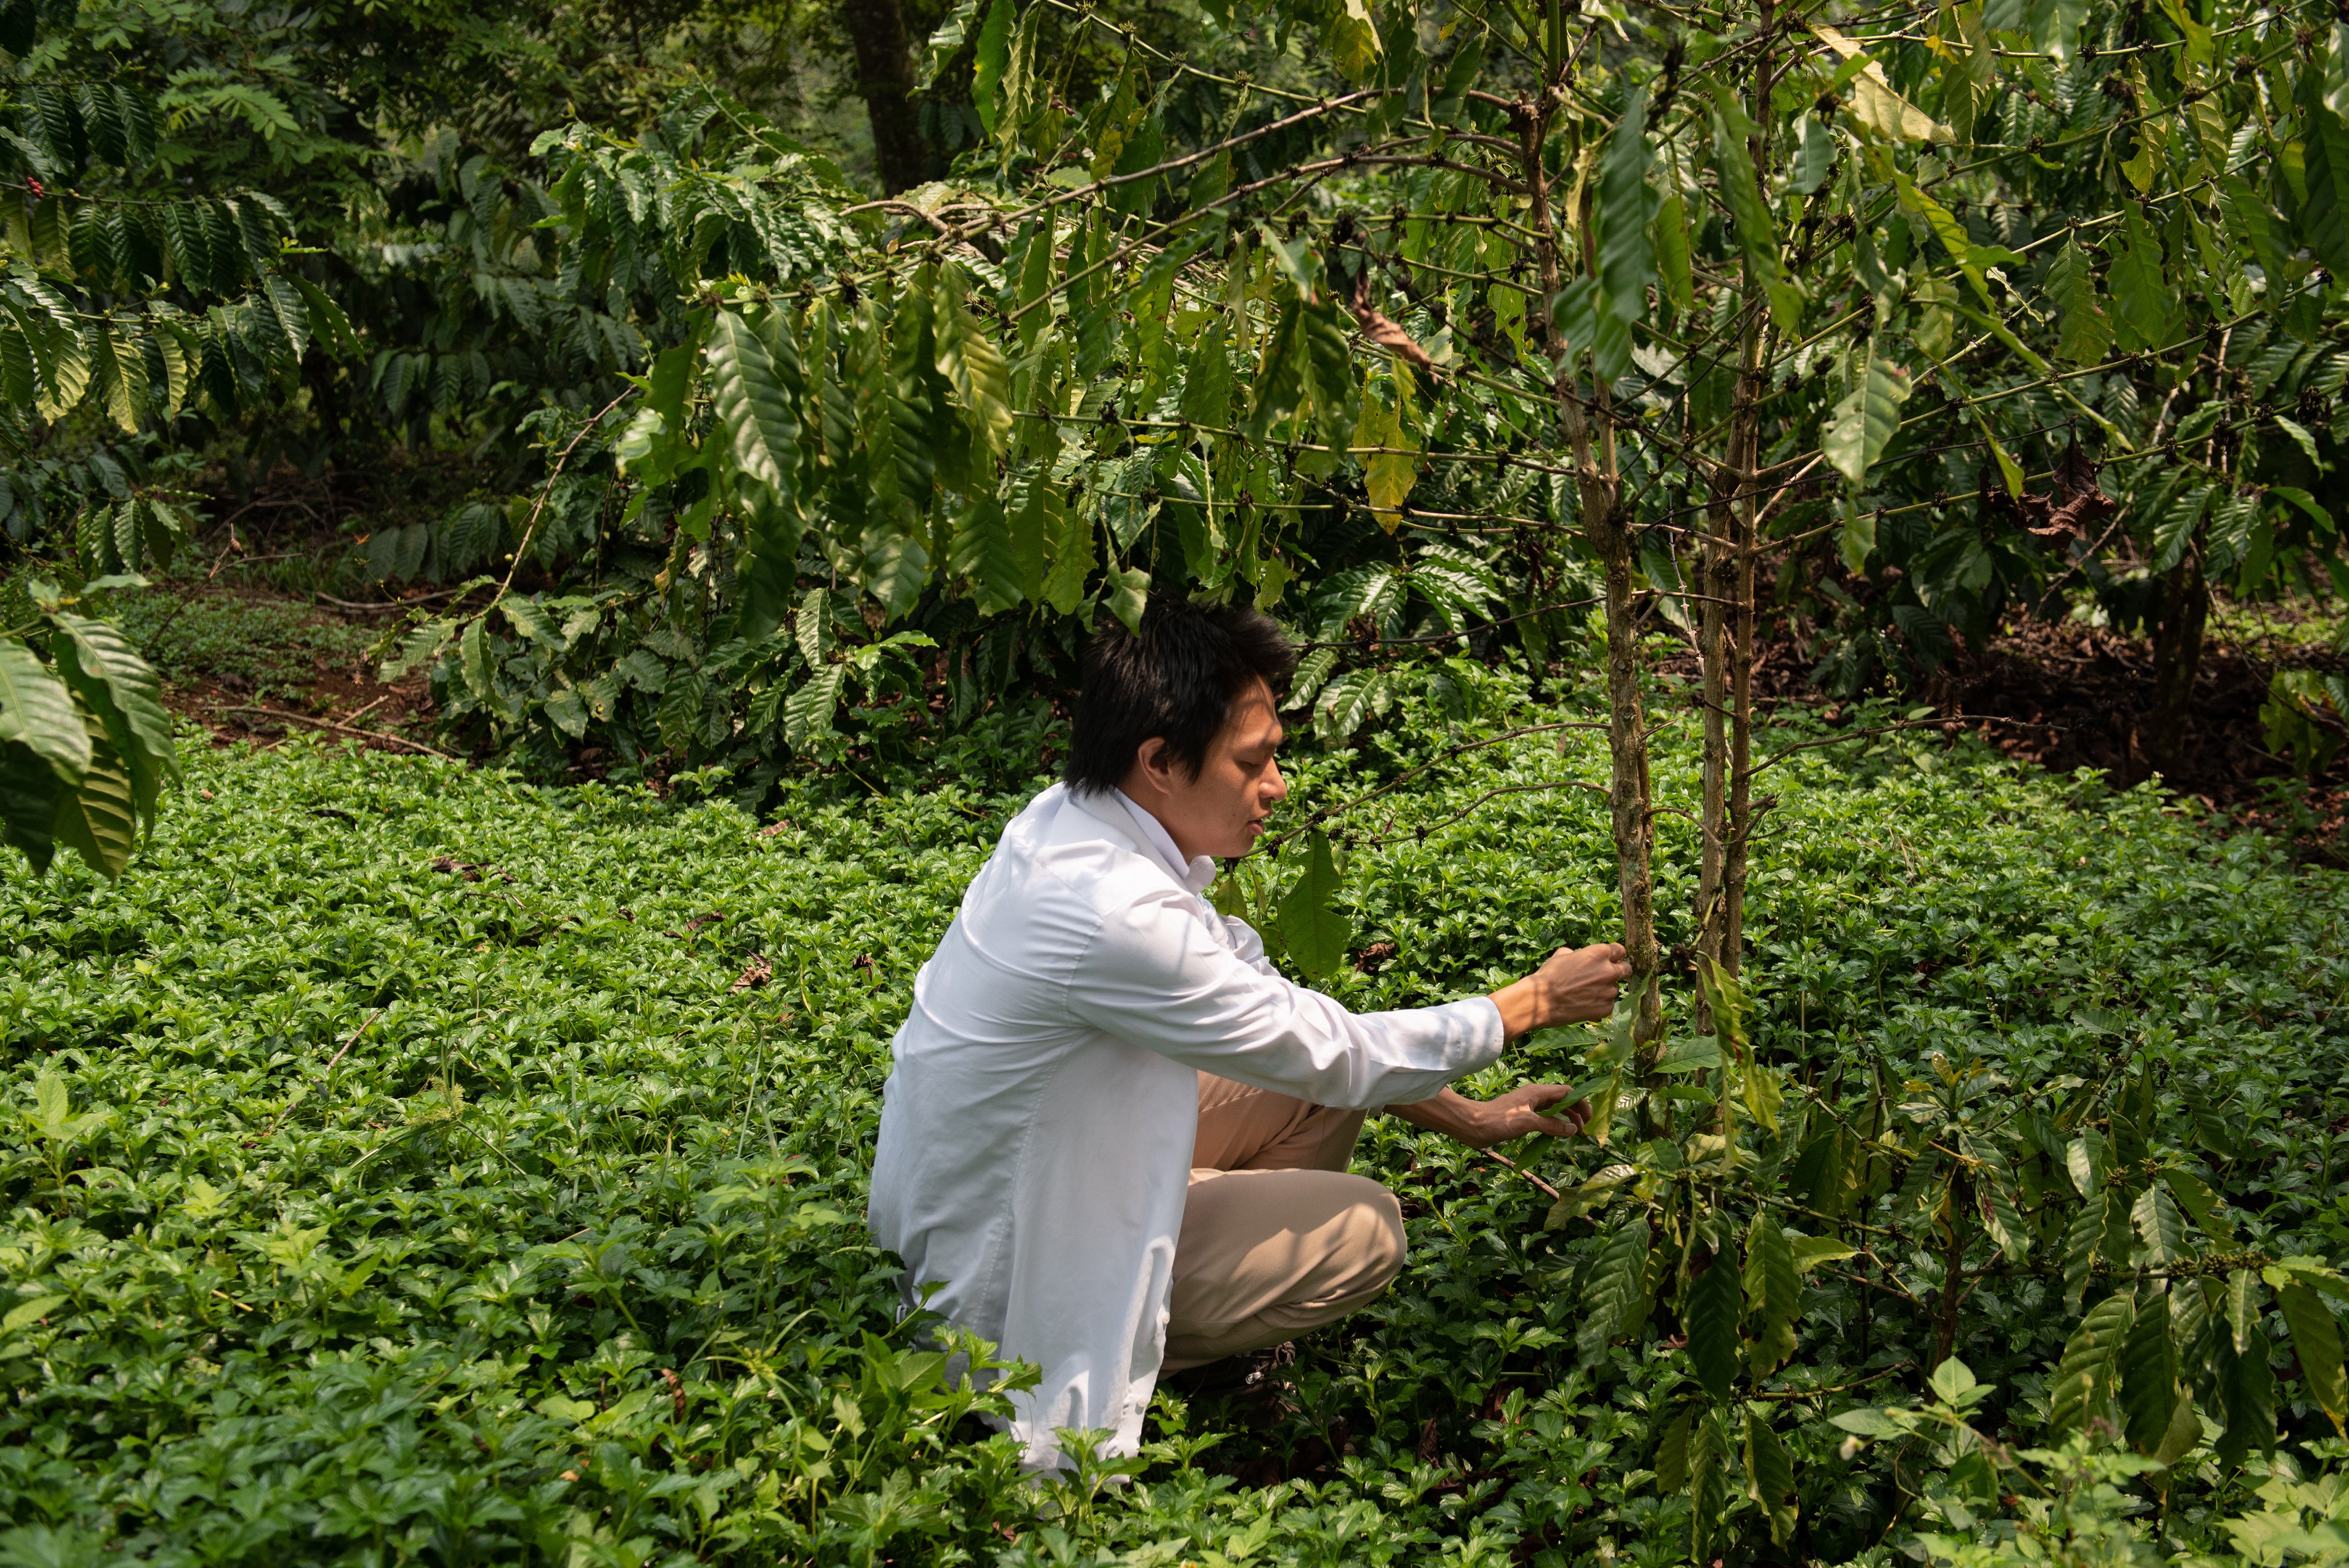 Thuan Sarzynski shows off a robusta coffee plant in Lam Dong province